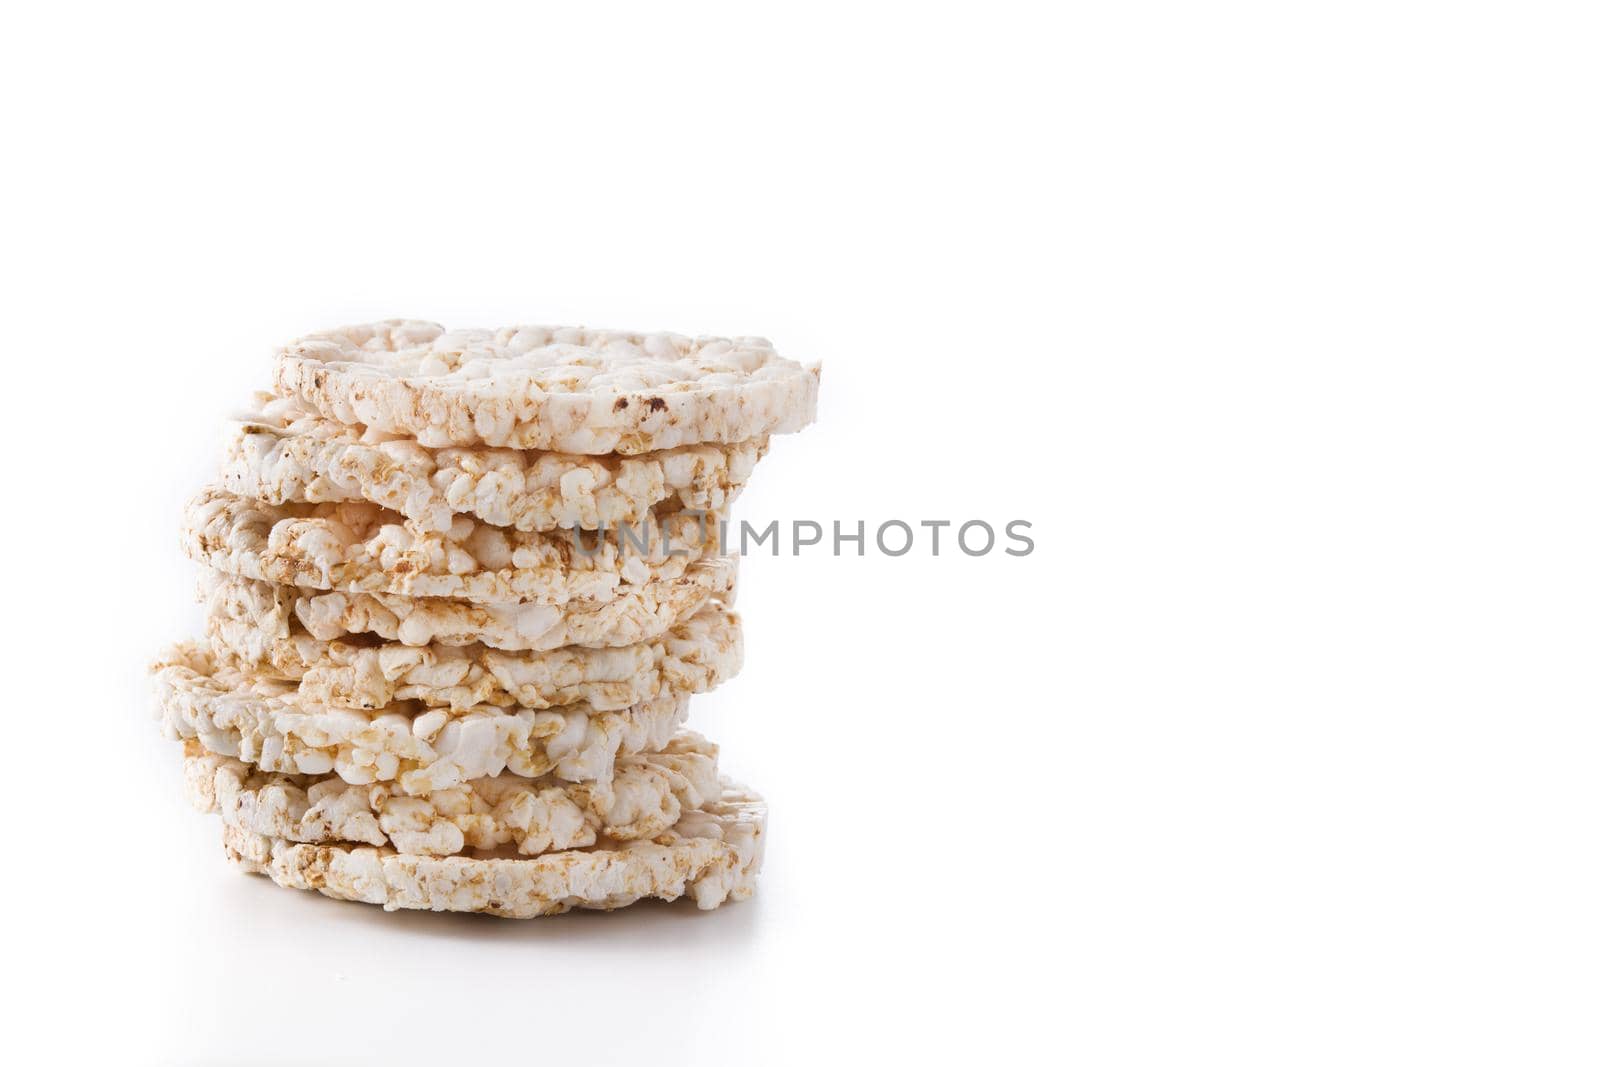 Pile of puffed rice cakes by chandlervid85